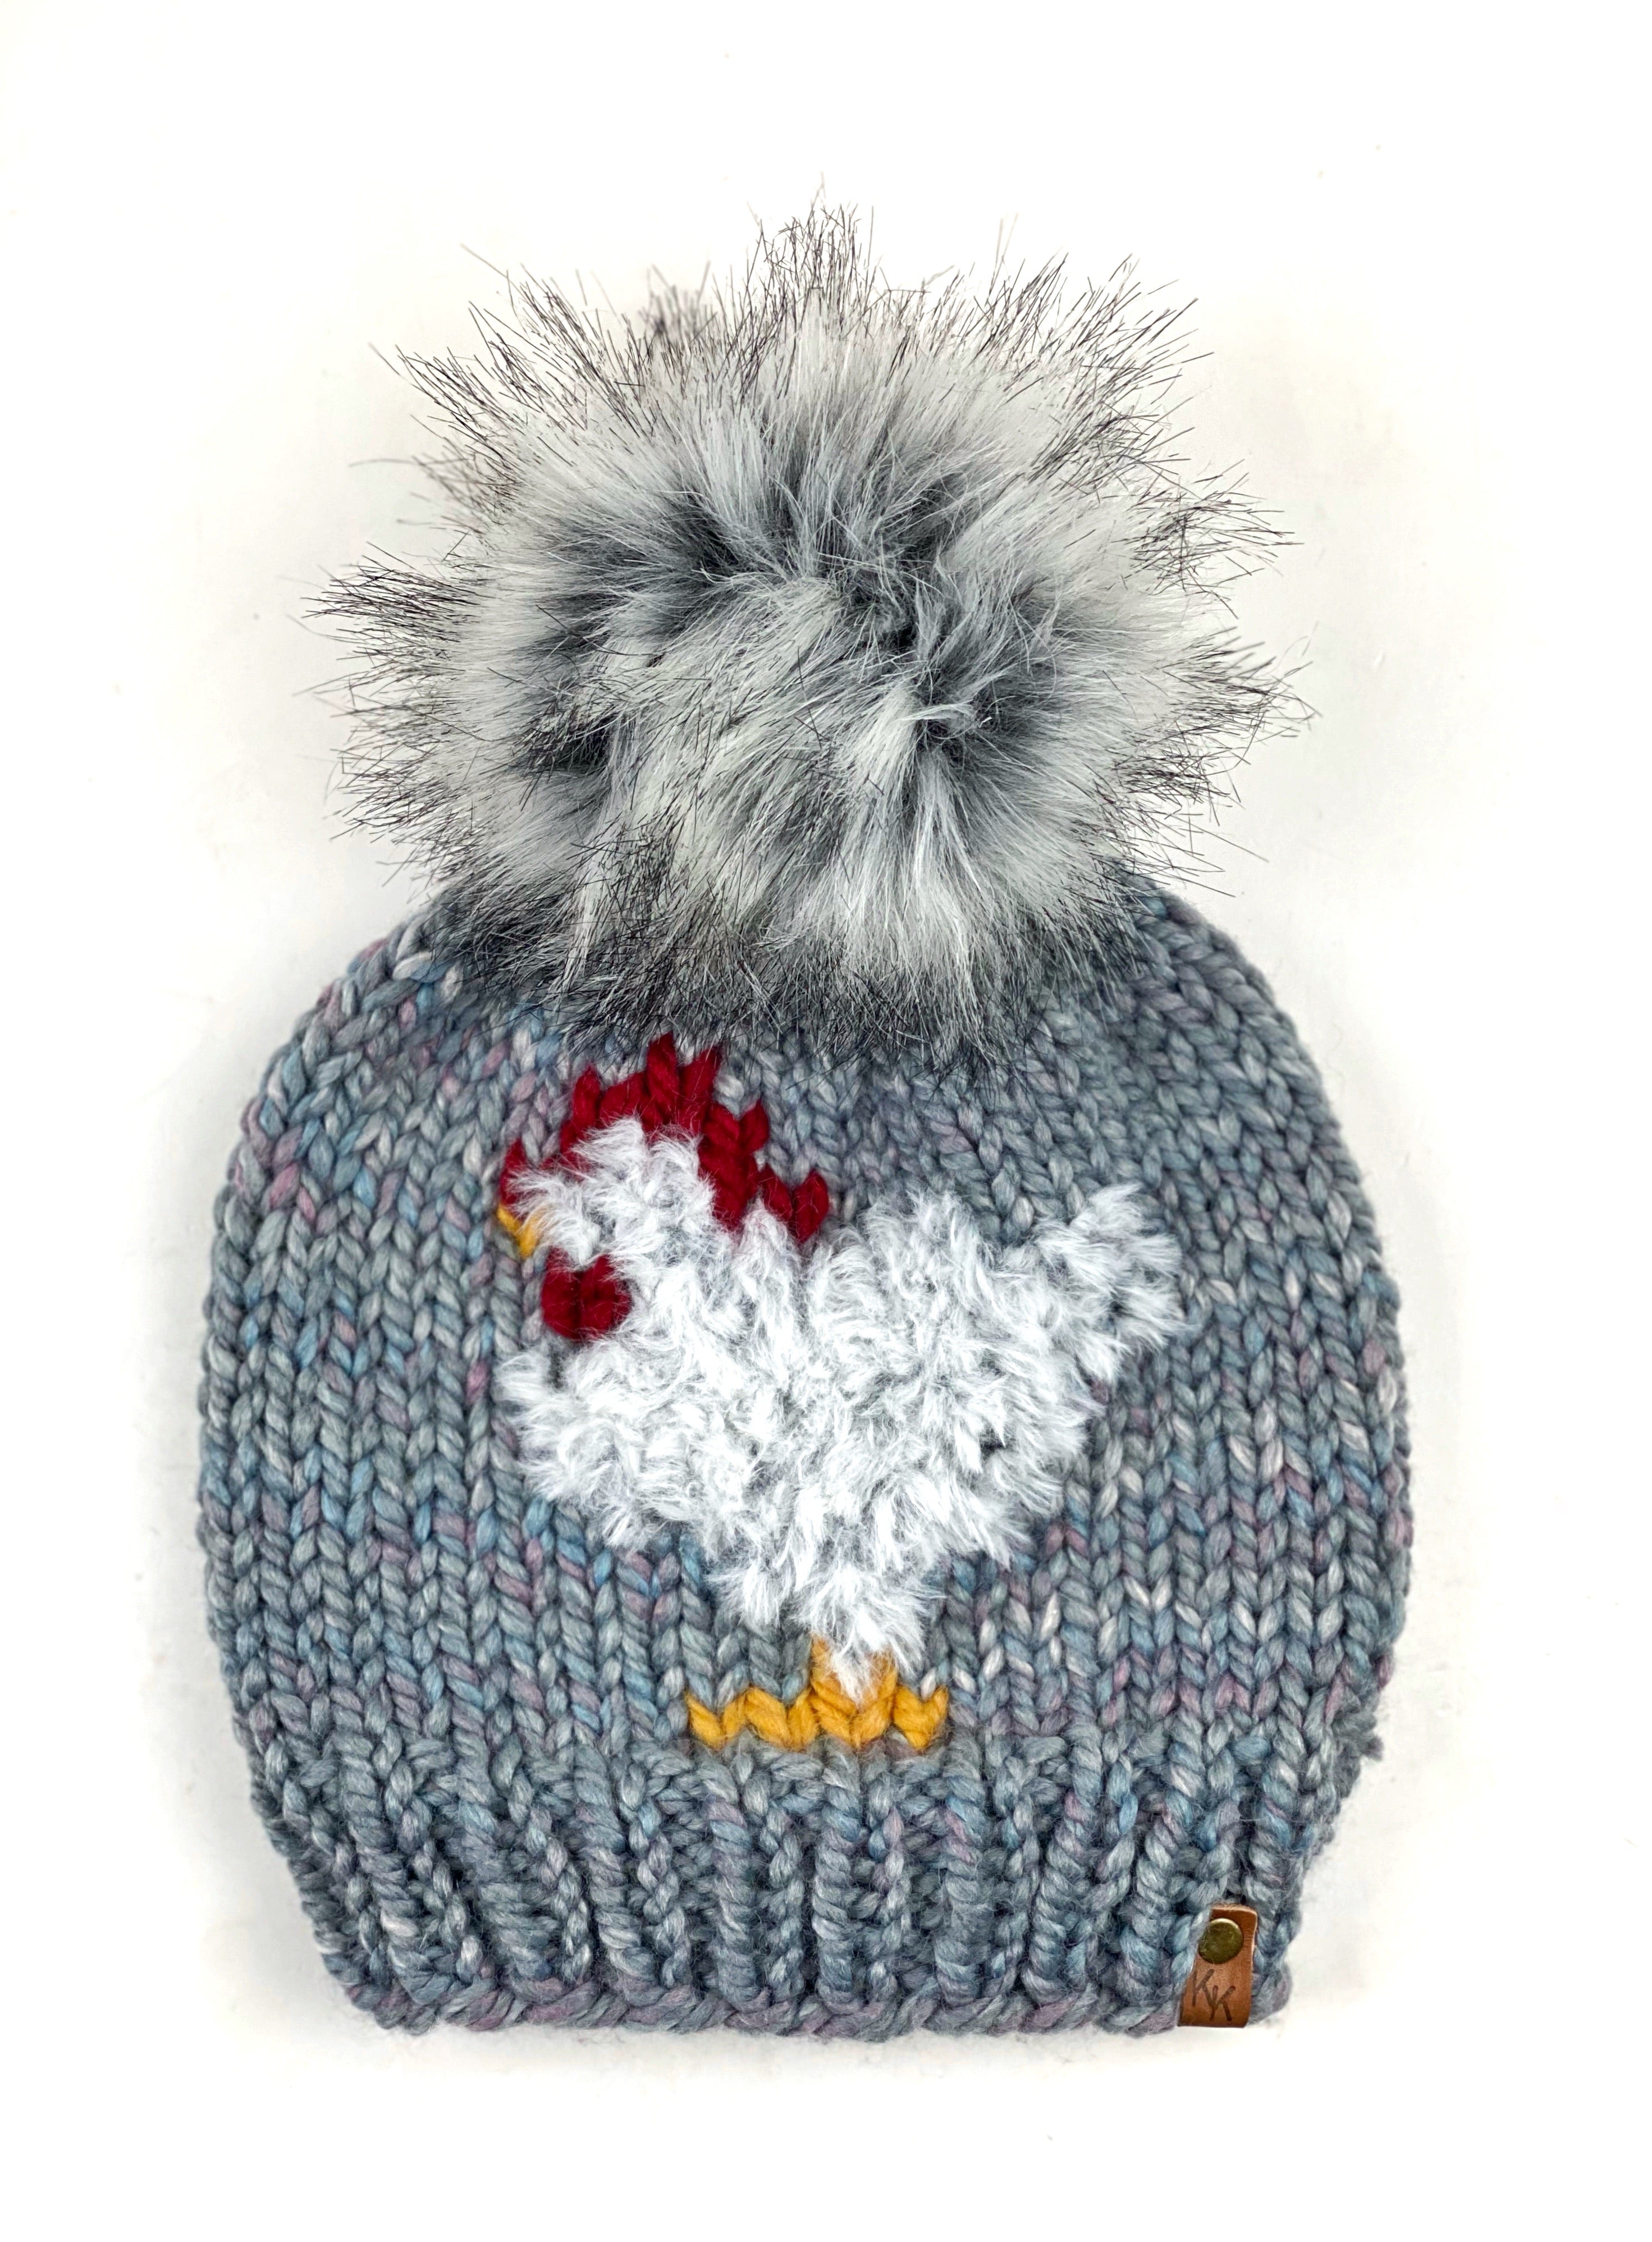 Knit Furry Chicken Beanie Storm Front Wool Blend Womens Adult Hat Faux Fur Pom Pom Hat